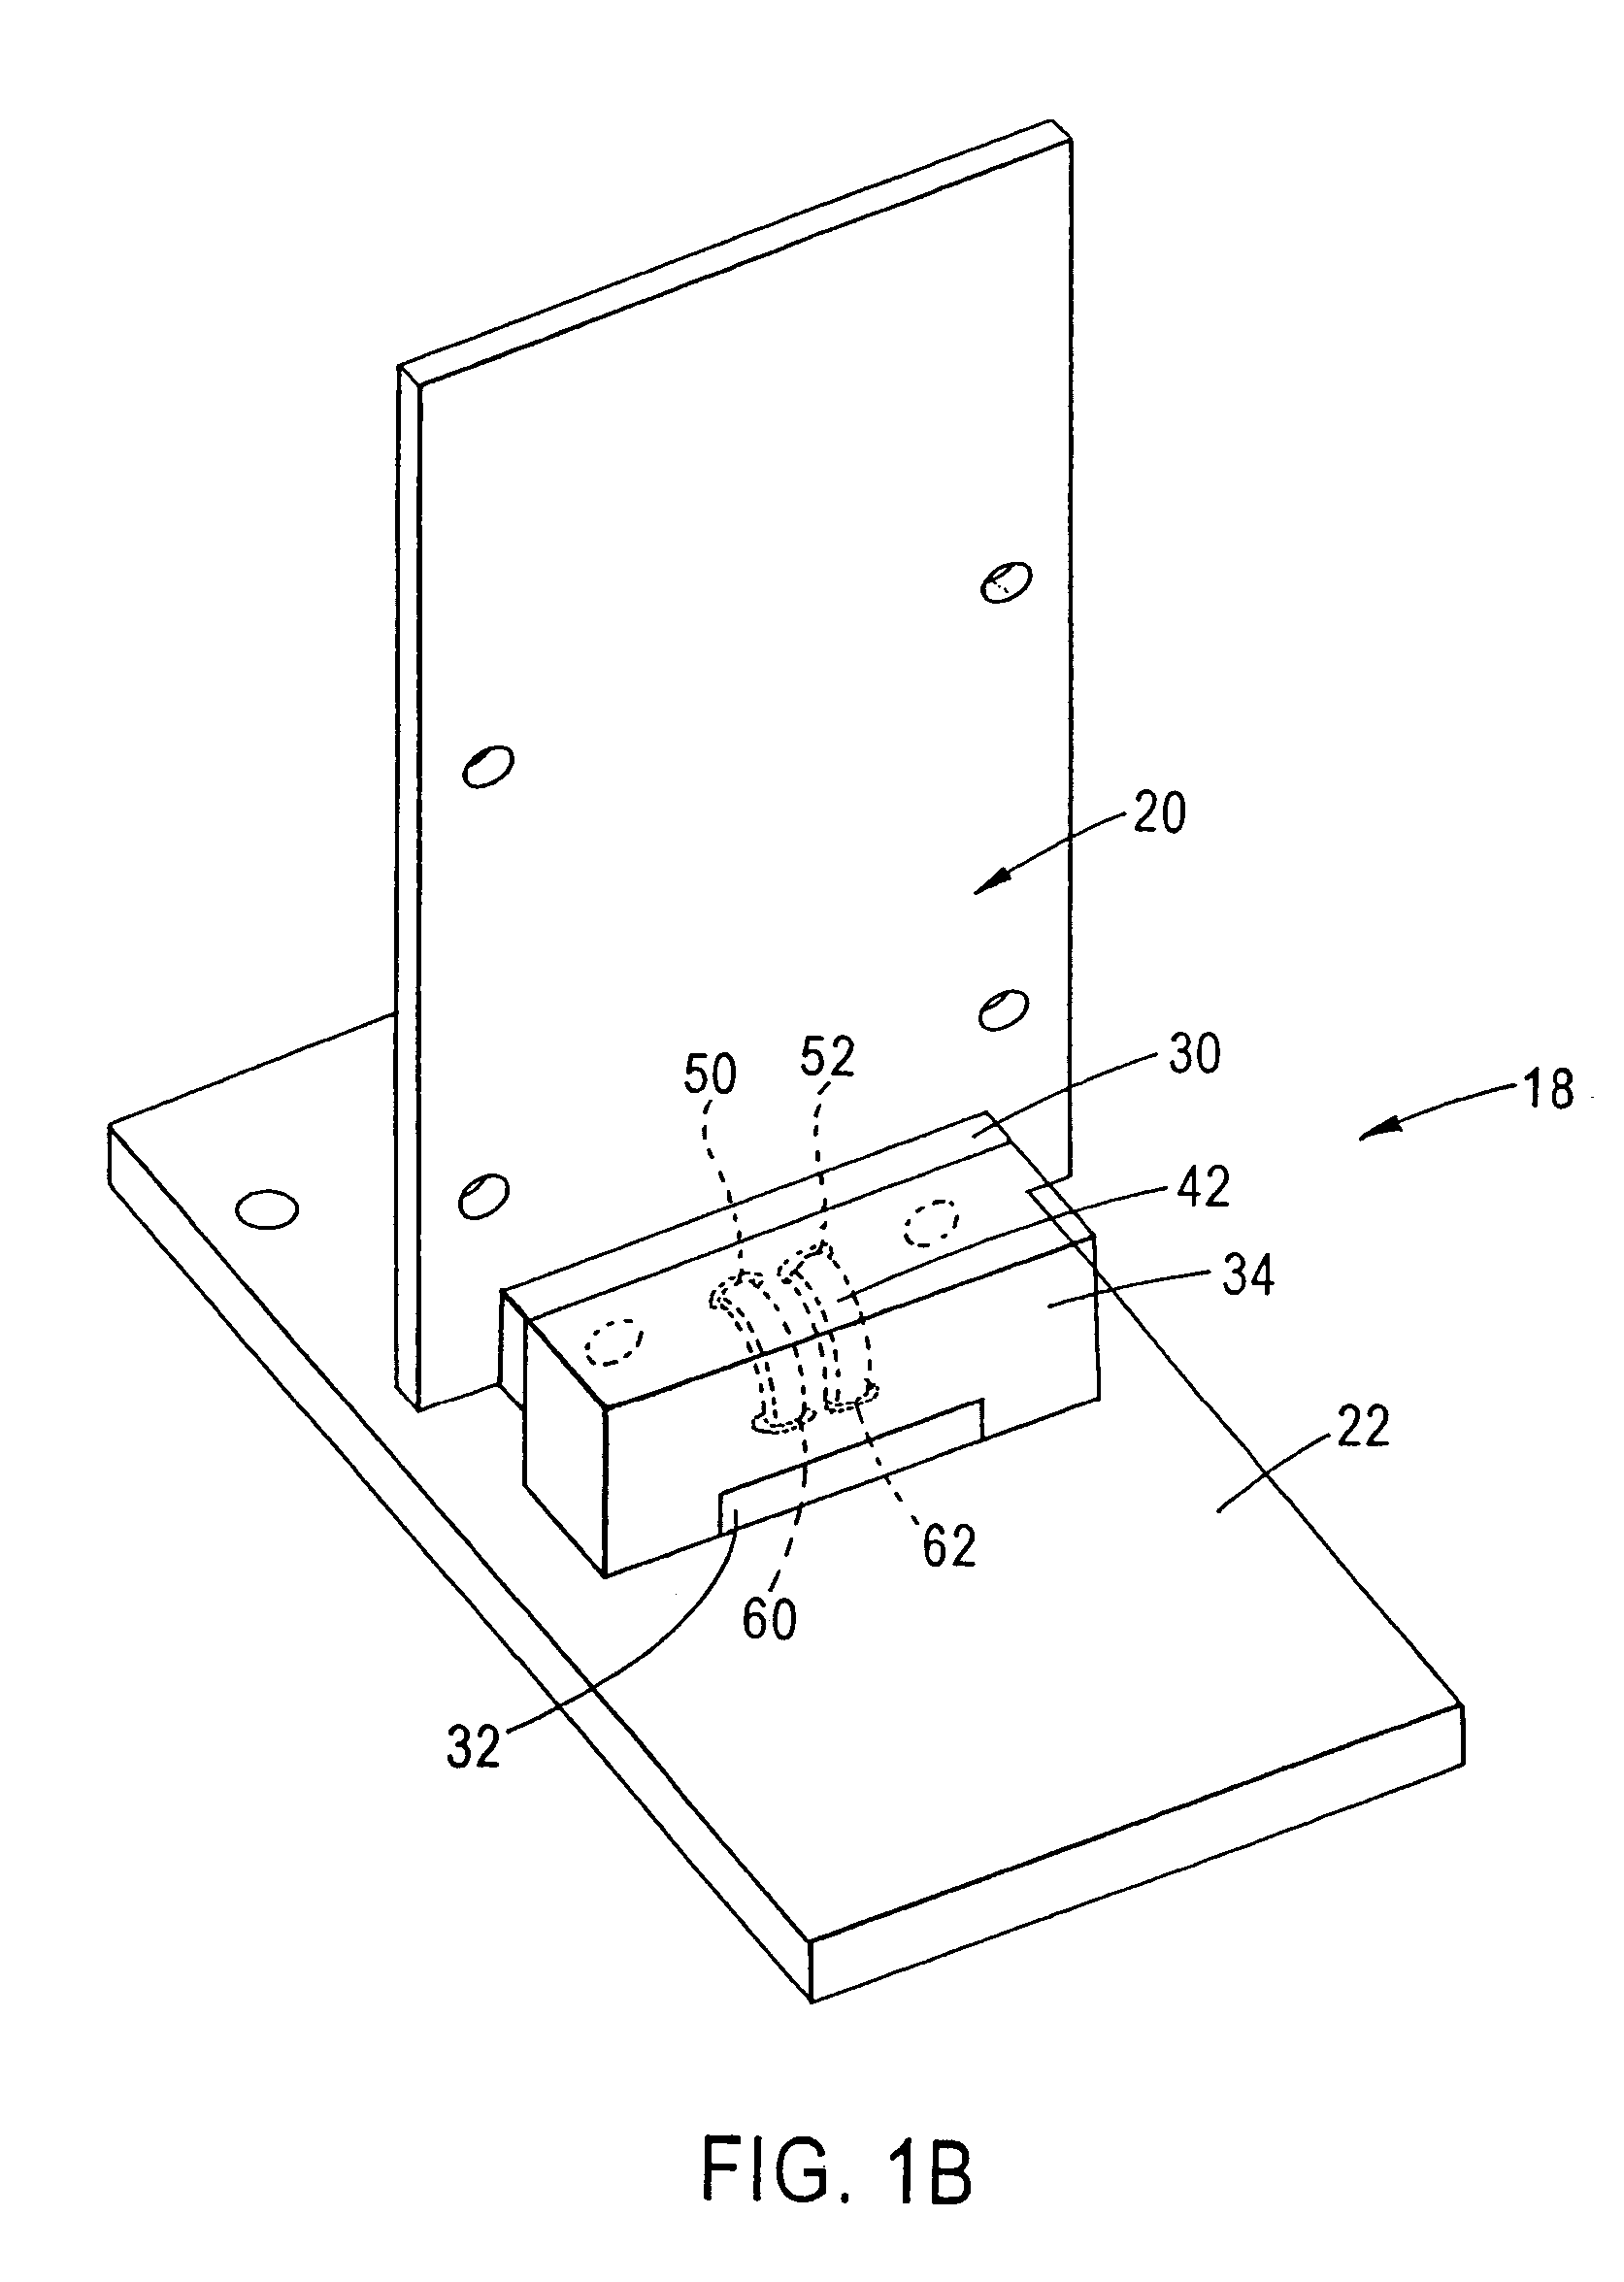 High speed, high density interconnect system for differential and single-ended transmission systems